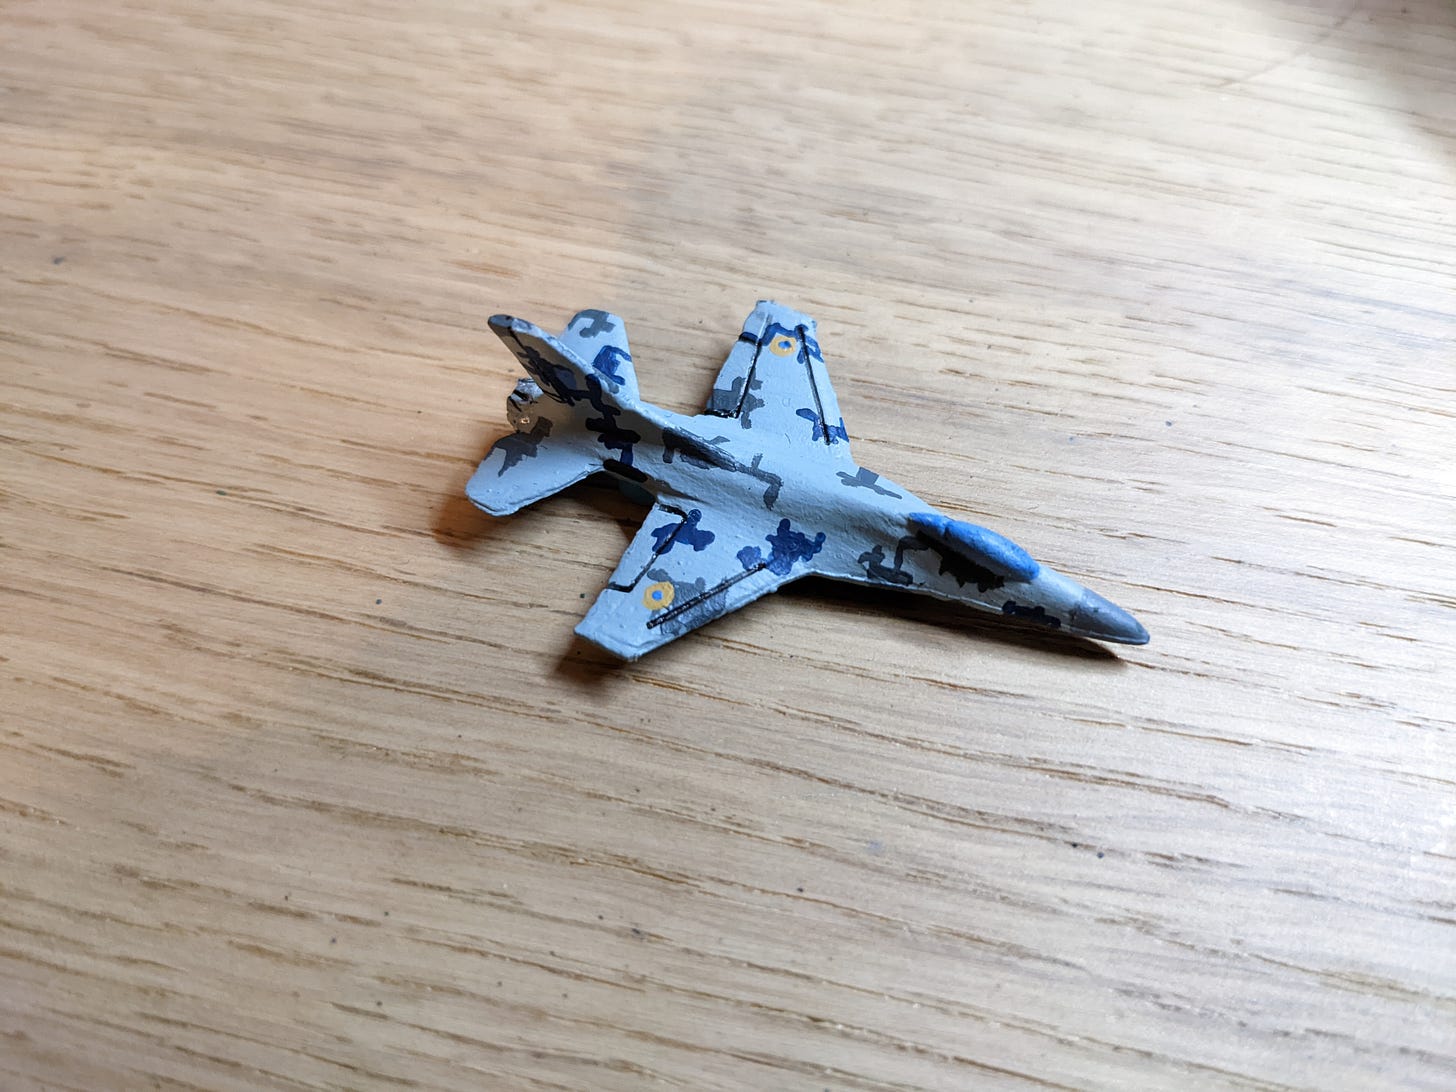 A 6 mm scale model of an F-16 fighter painted in grey and light grey ukrainian digital camo